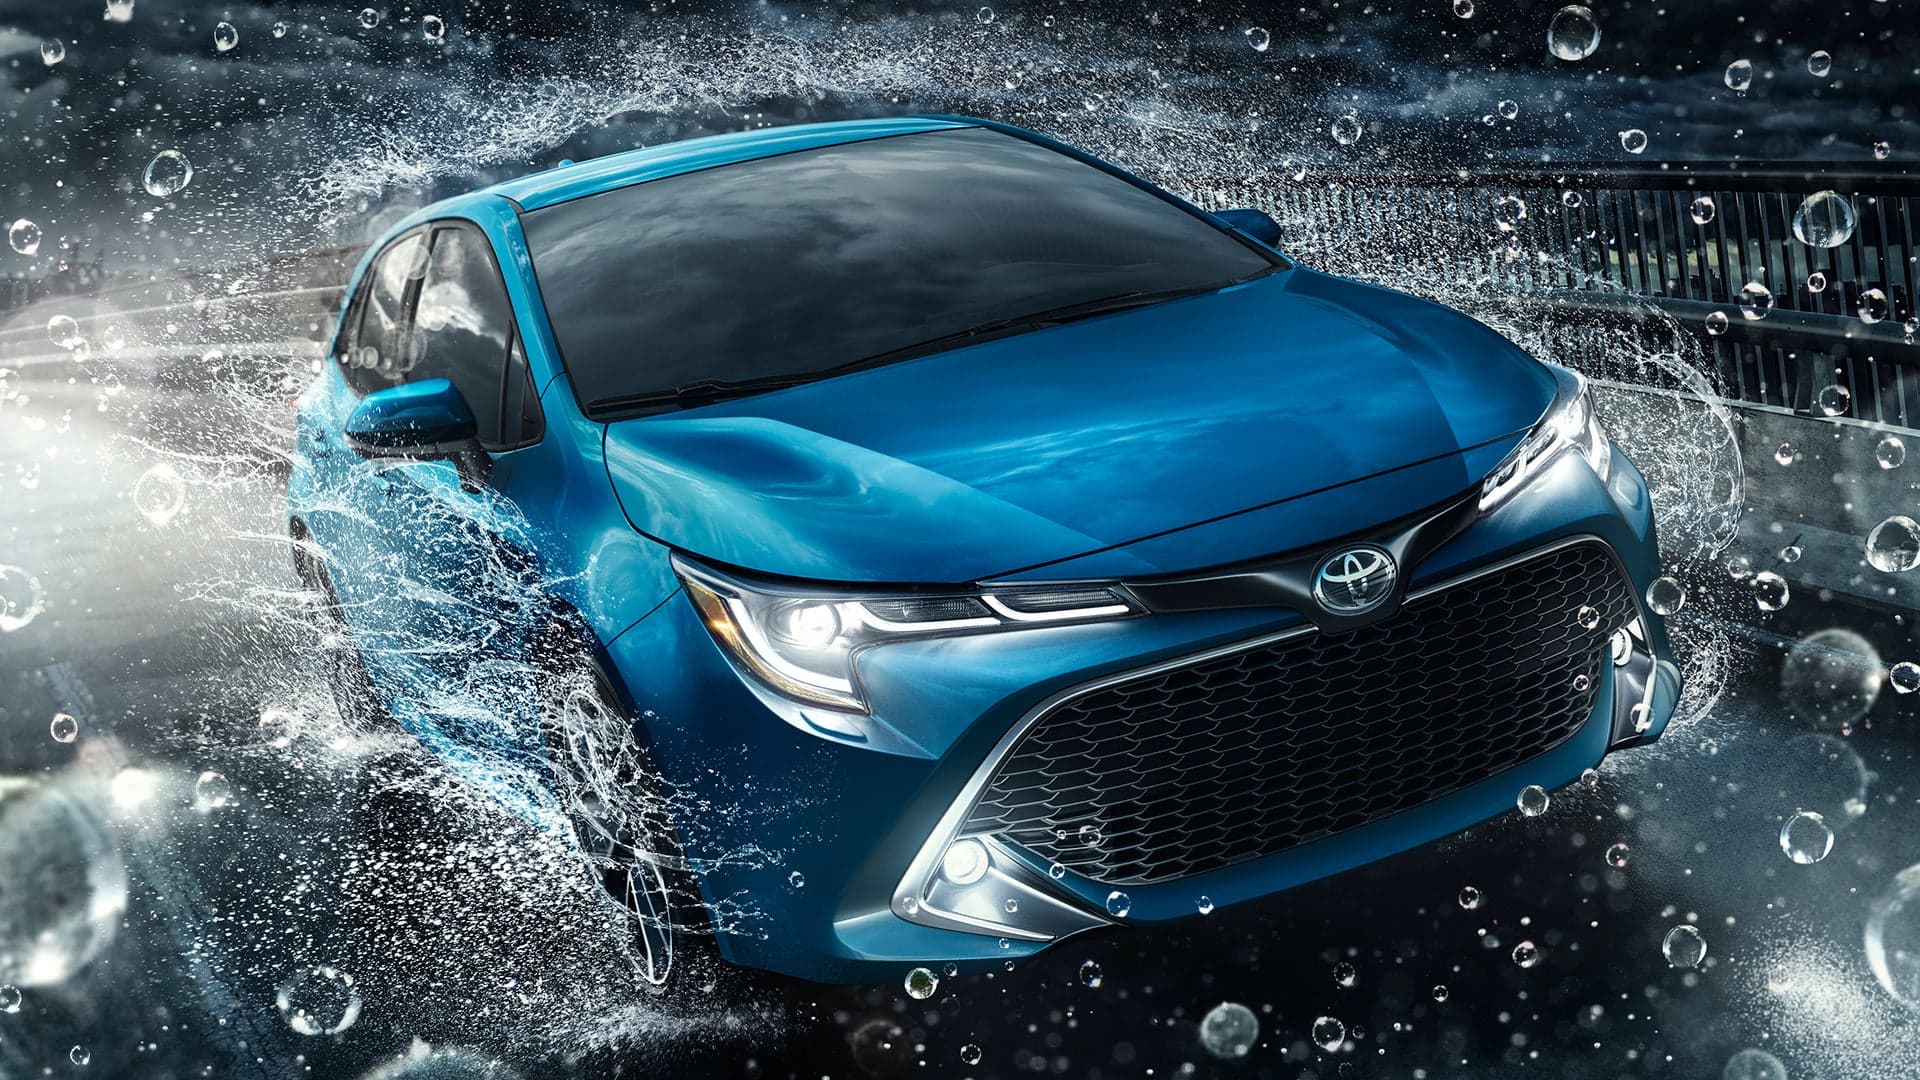 There’s a Toyota Corolla Hot Hatch Coming to America: Report